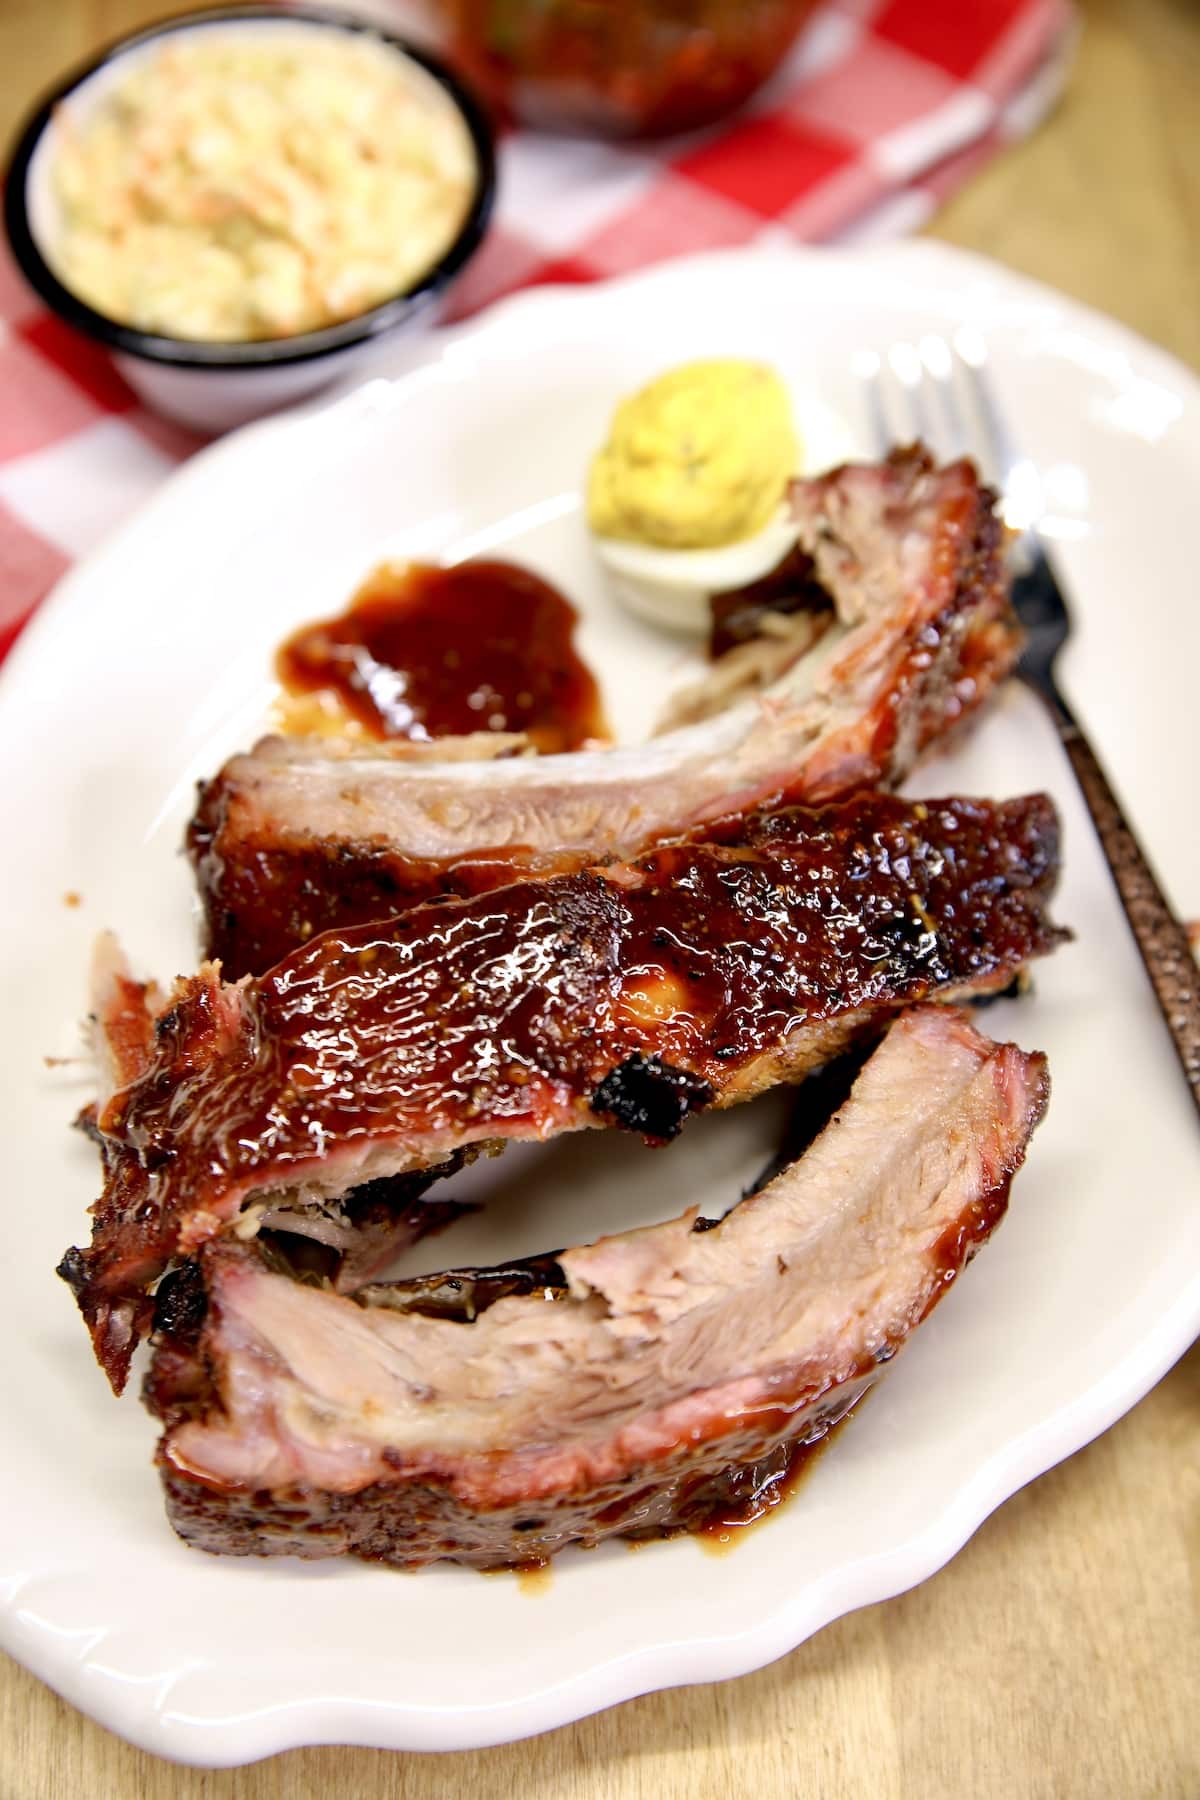 Barbecue baby back ribs on a plate.